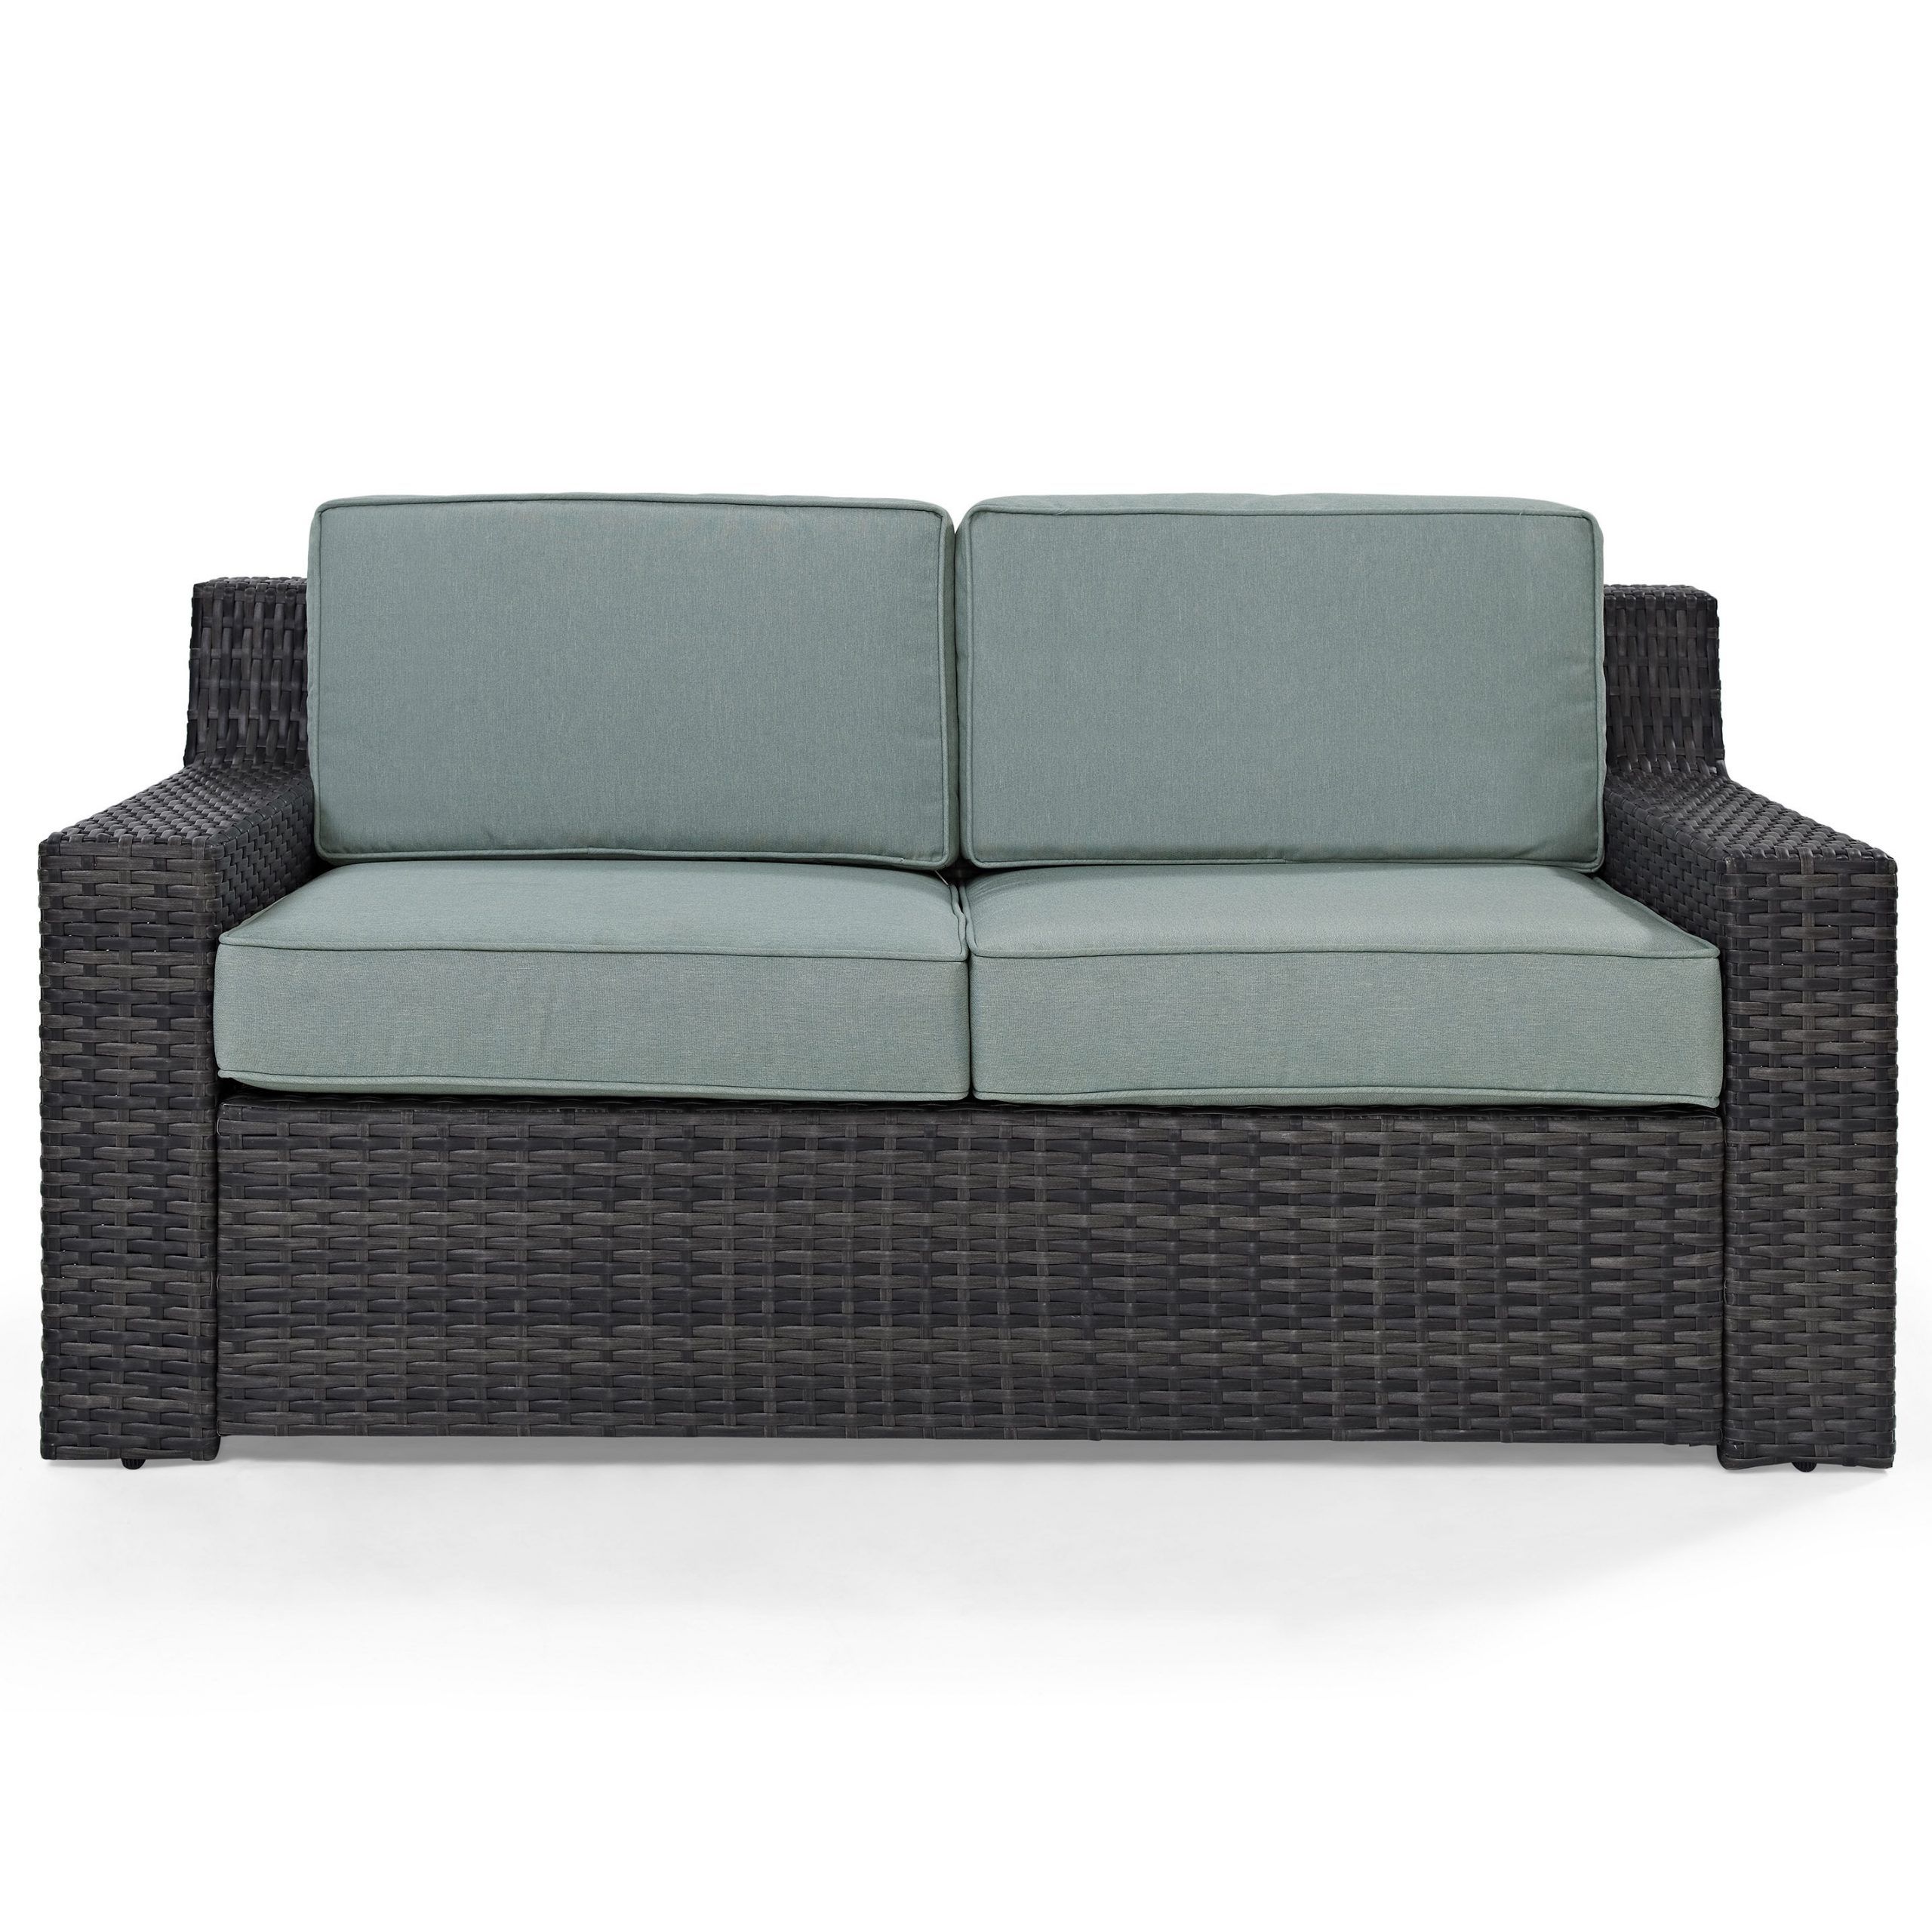 Most Current Linwood Loveseat With Cushions Pertaining To Linwood Loveseats With Cushions (View 2 of 25)